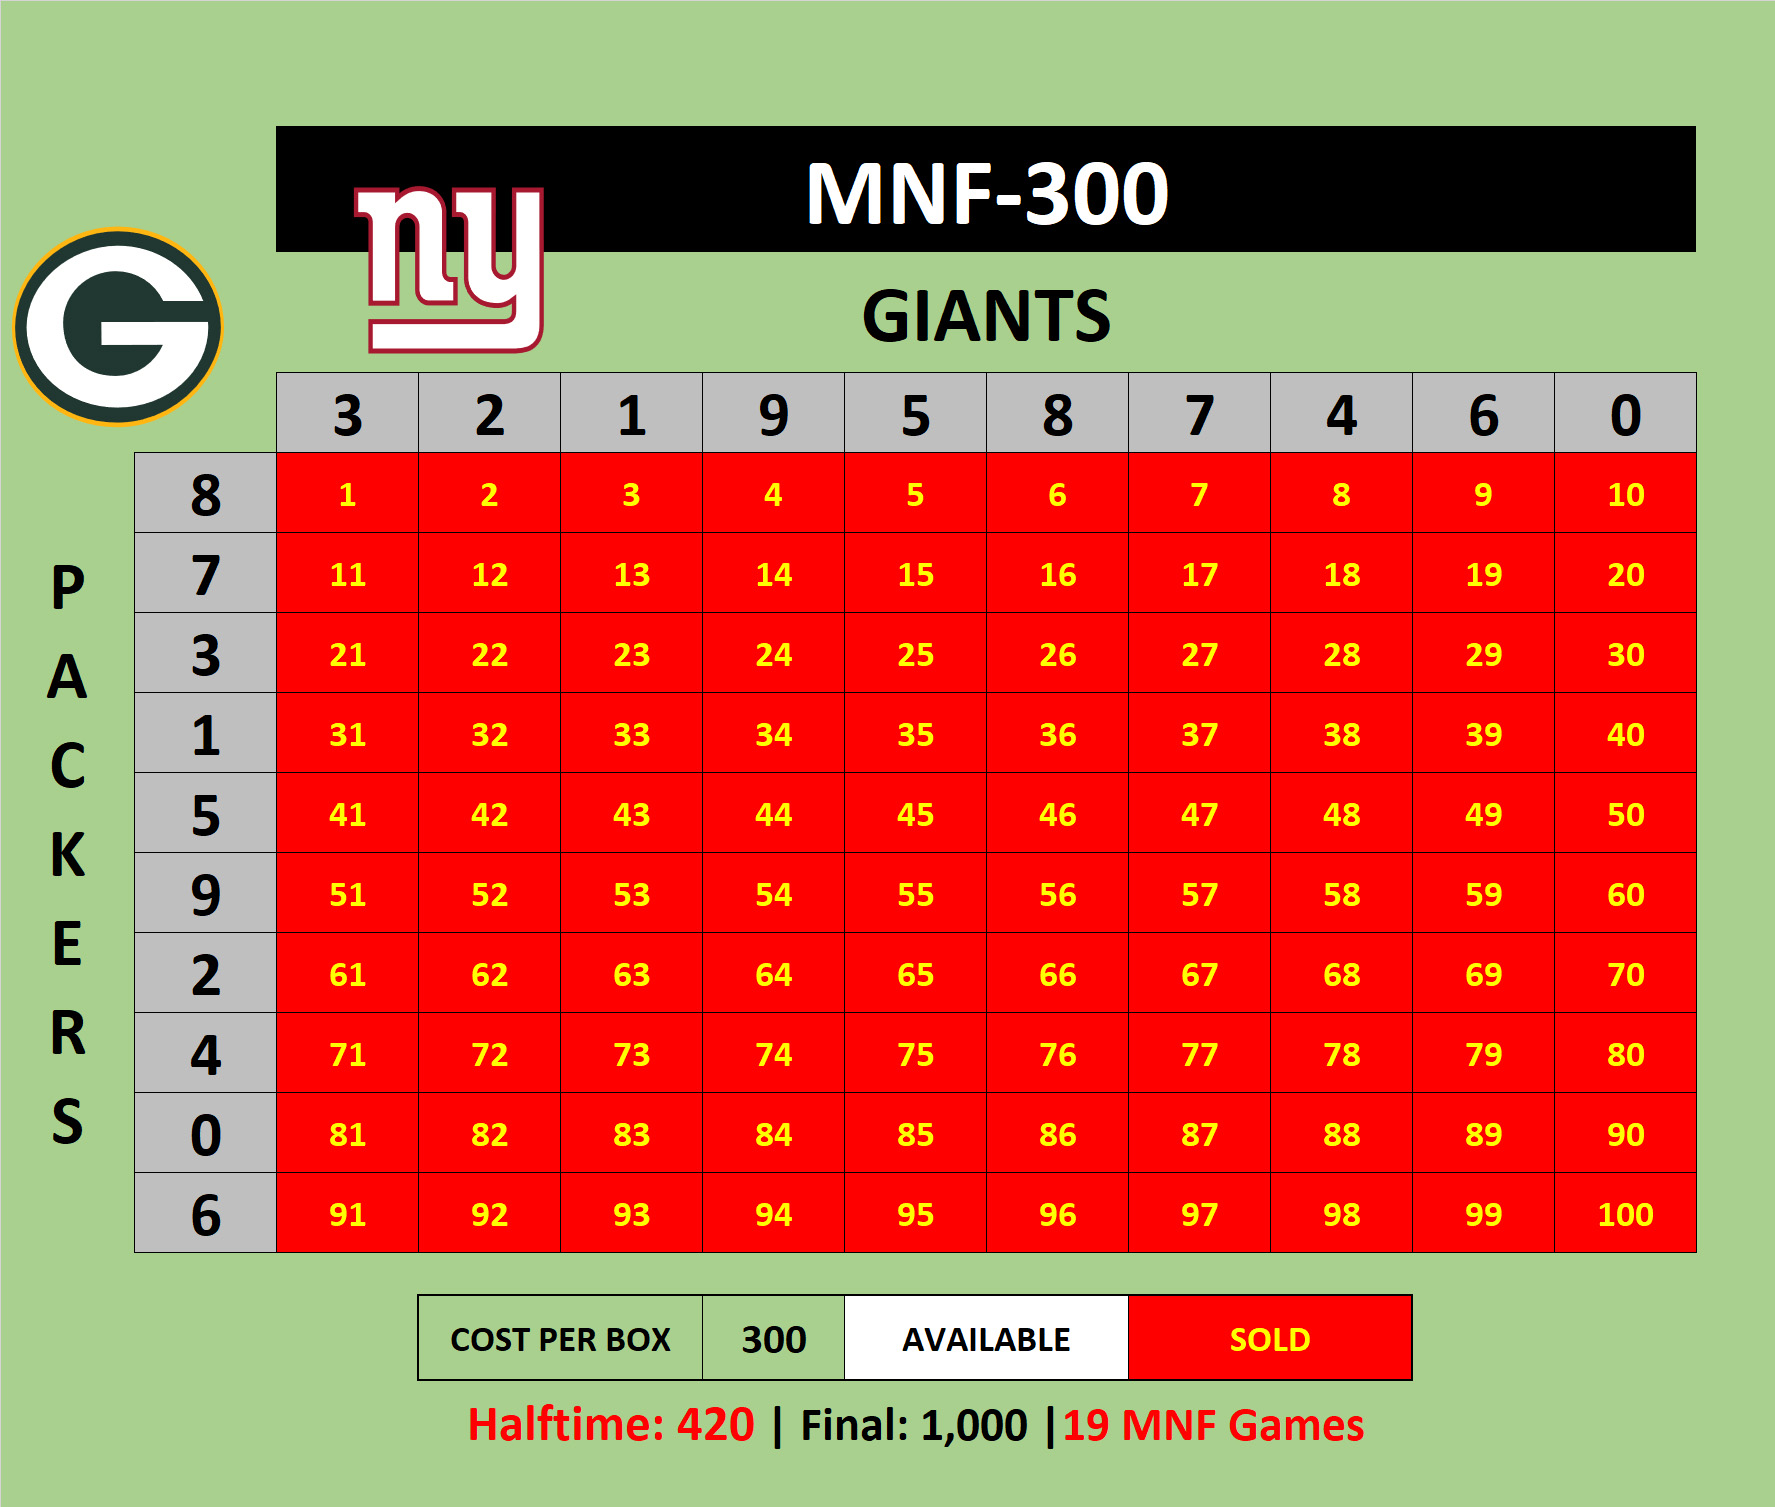 MNF-300 Packers at Giants